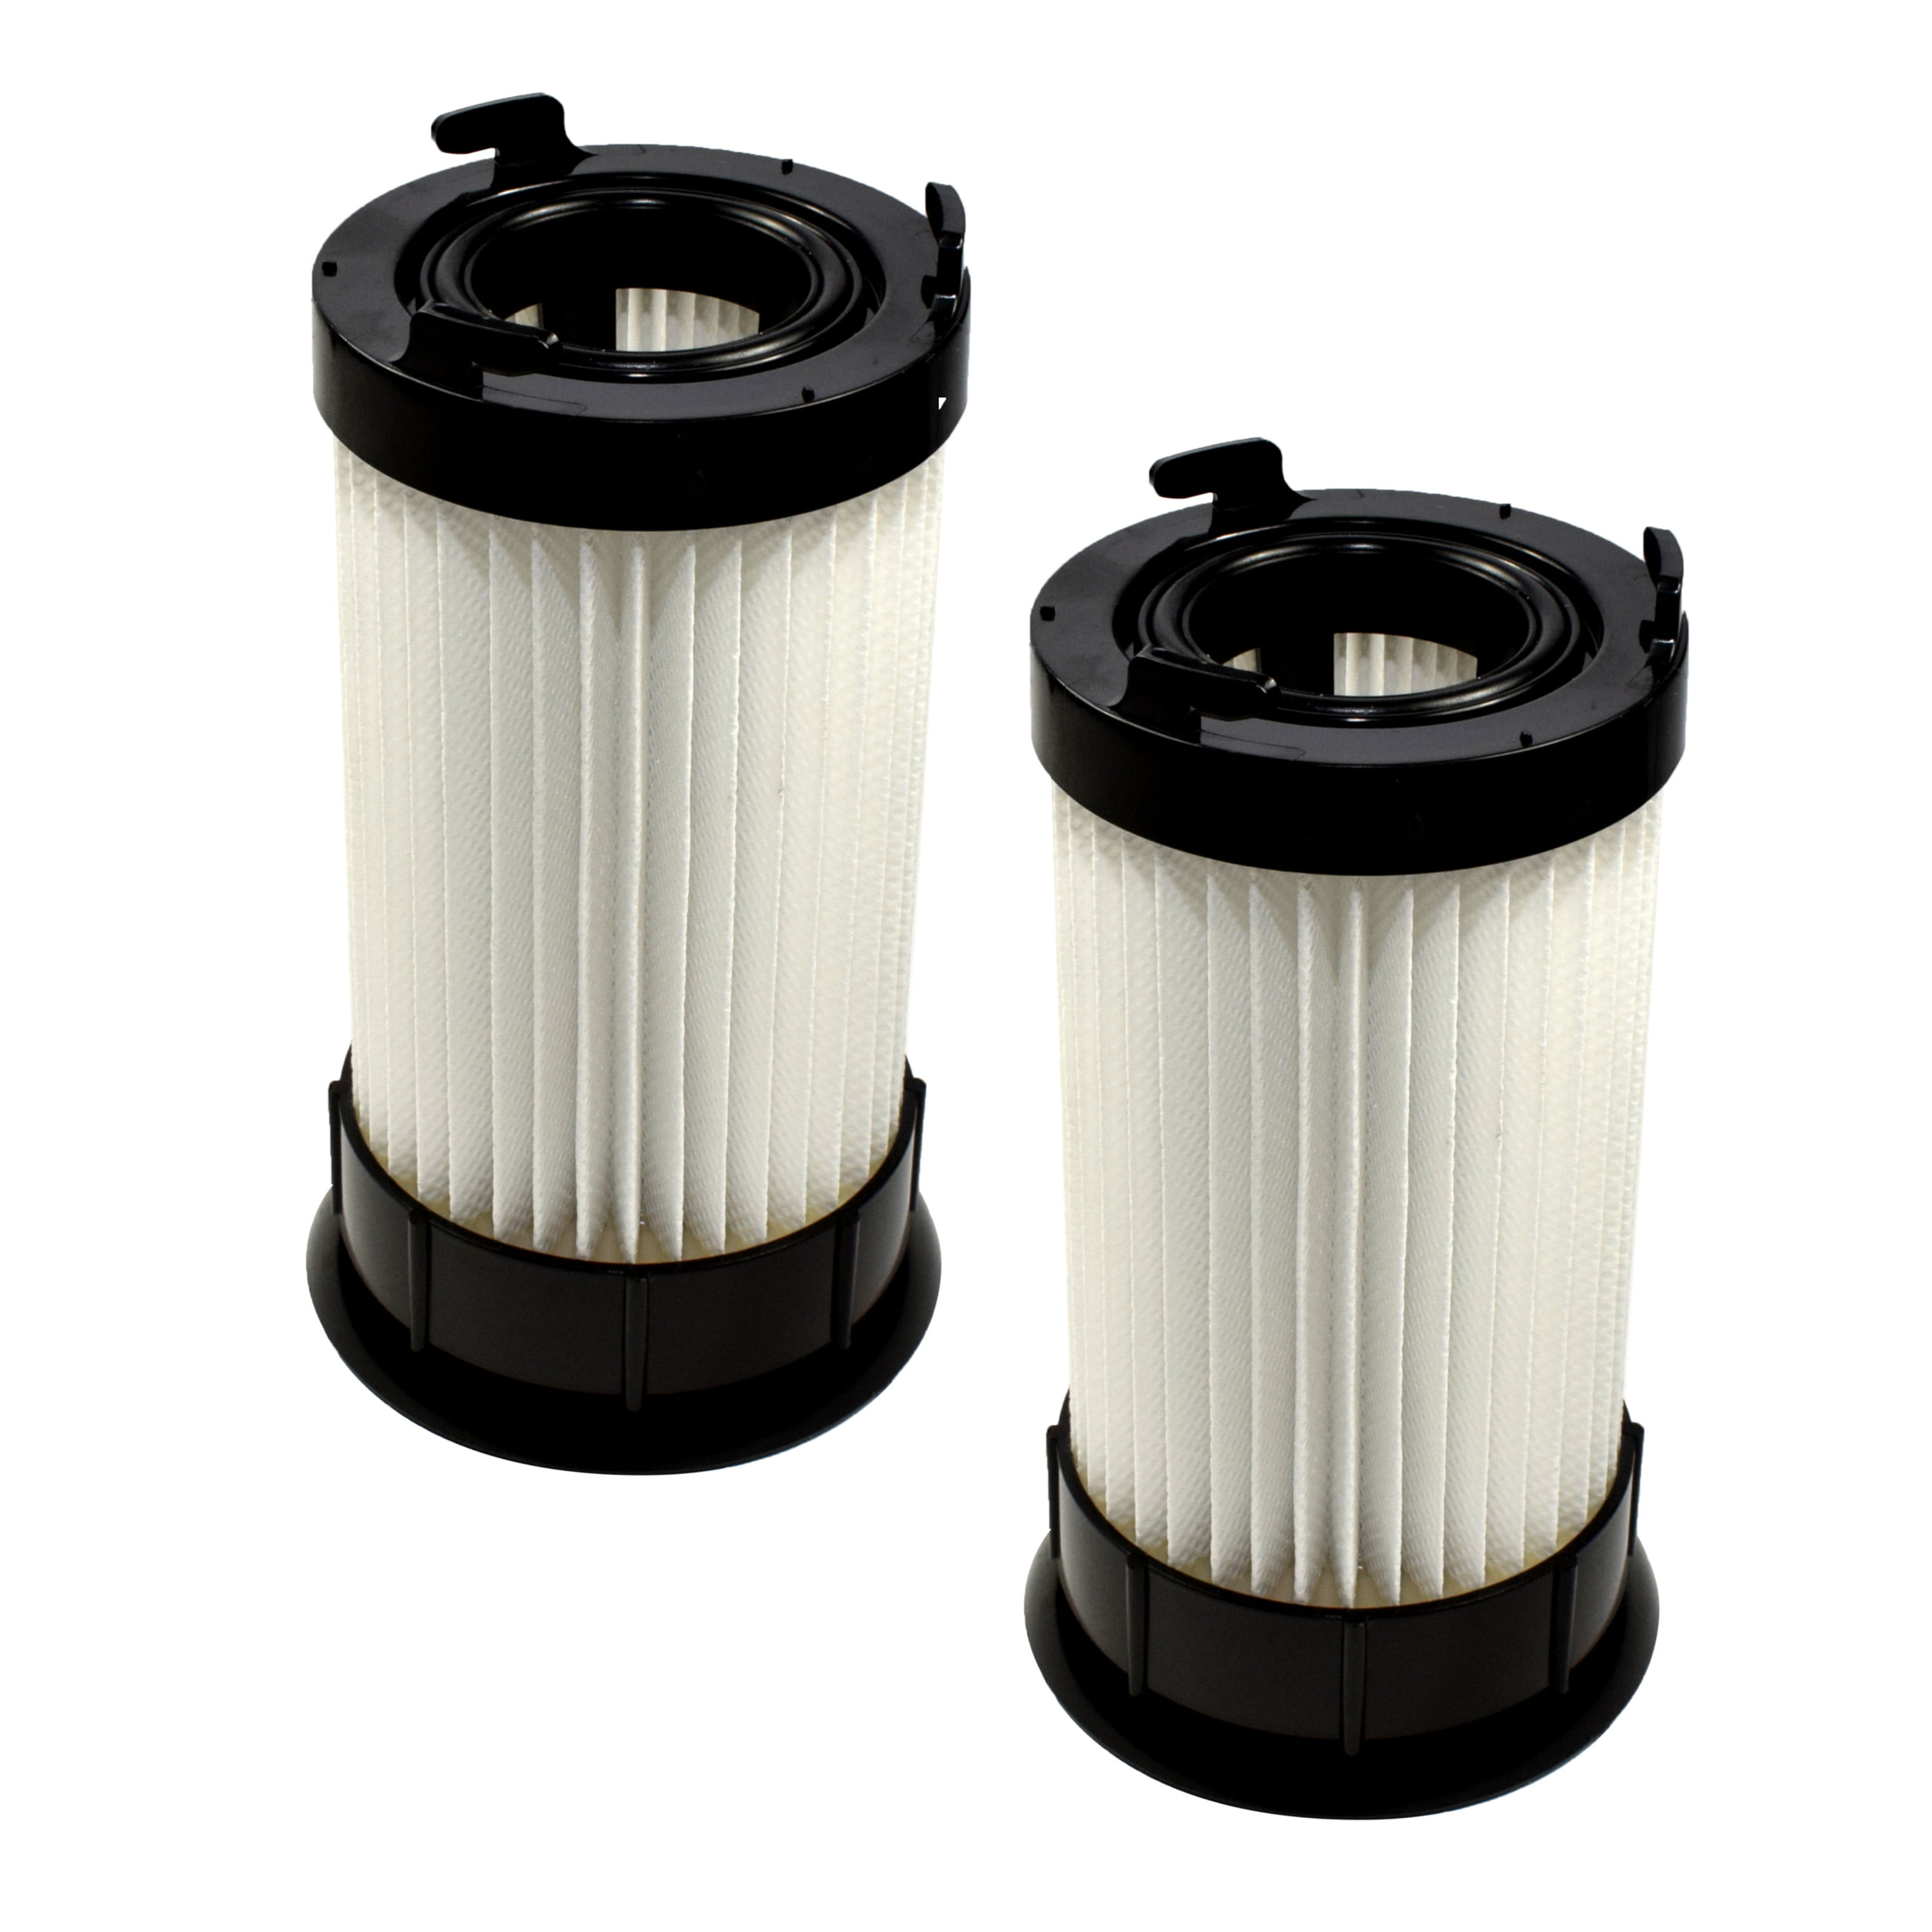 FH40030 2x Washable Reusable Filter for Hoover FH40010 FH40010B FH40011B